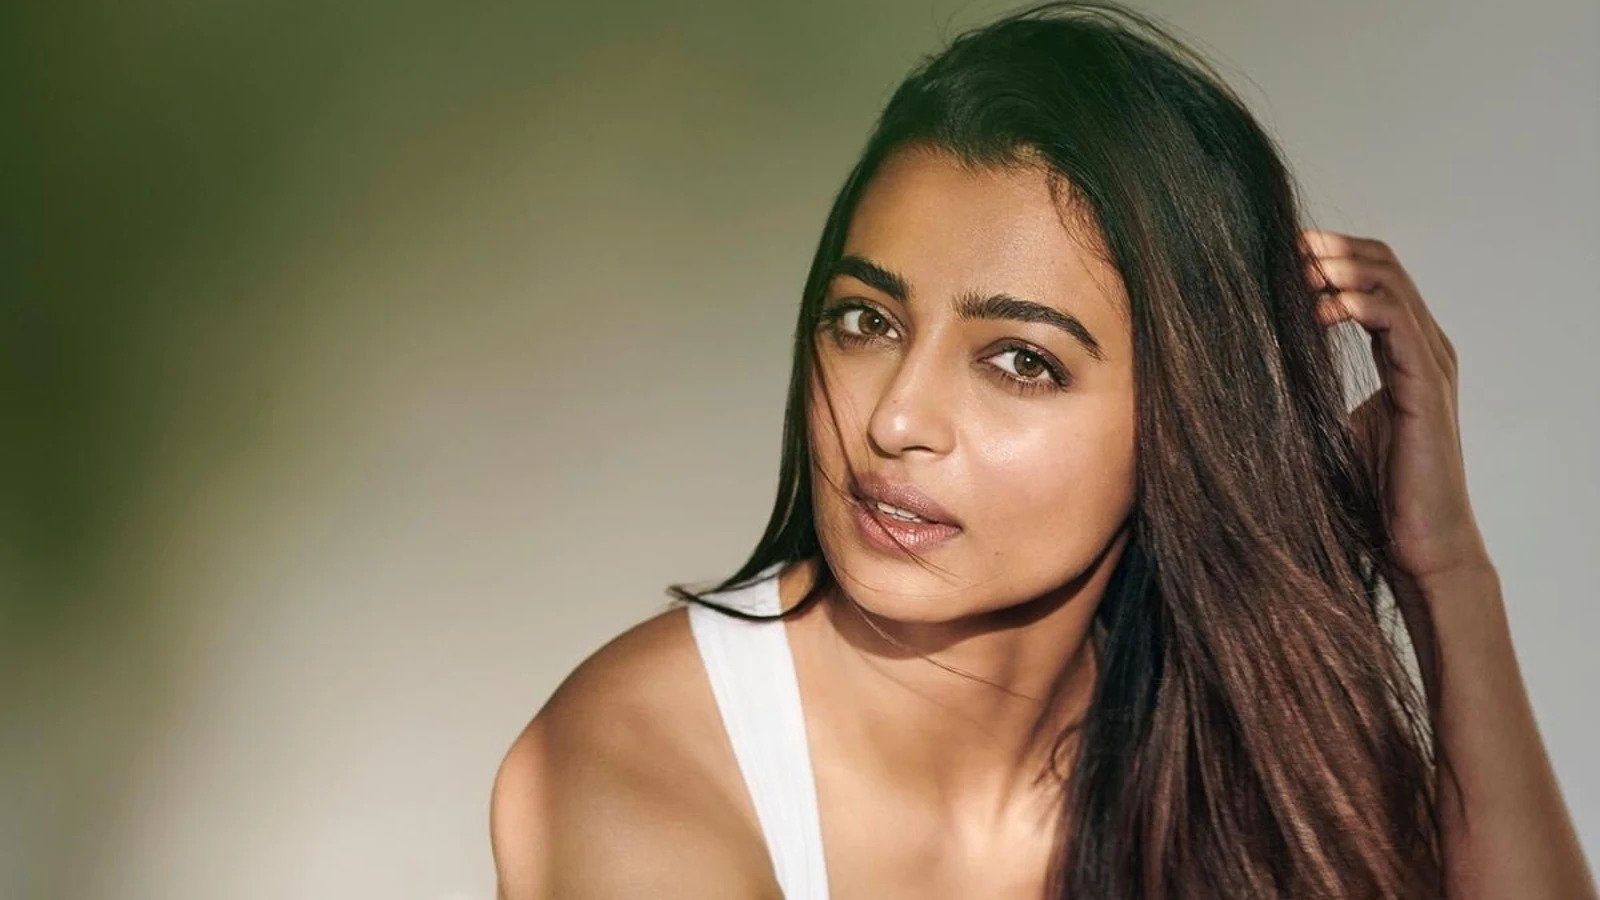 Happy Birthday Radhika Apte: 7 Hot Pictures of the 'Forensic' Actress